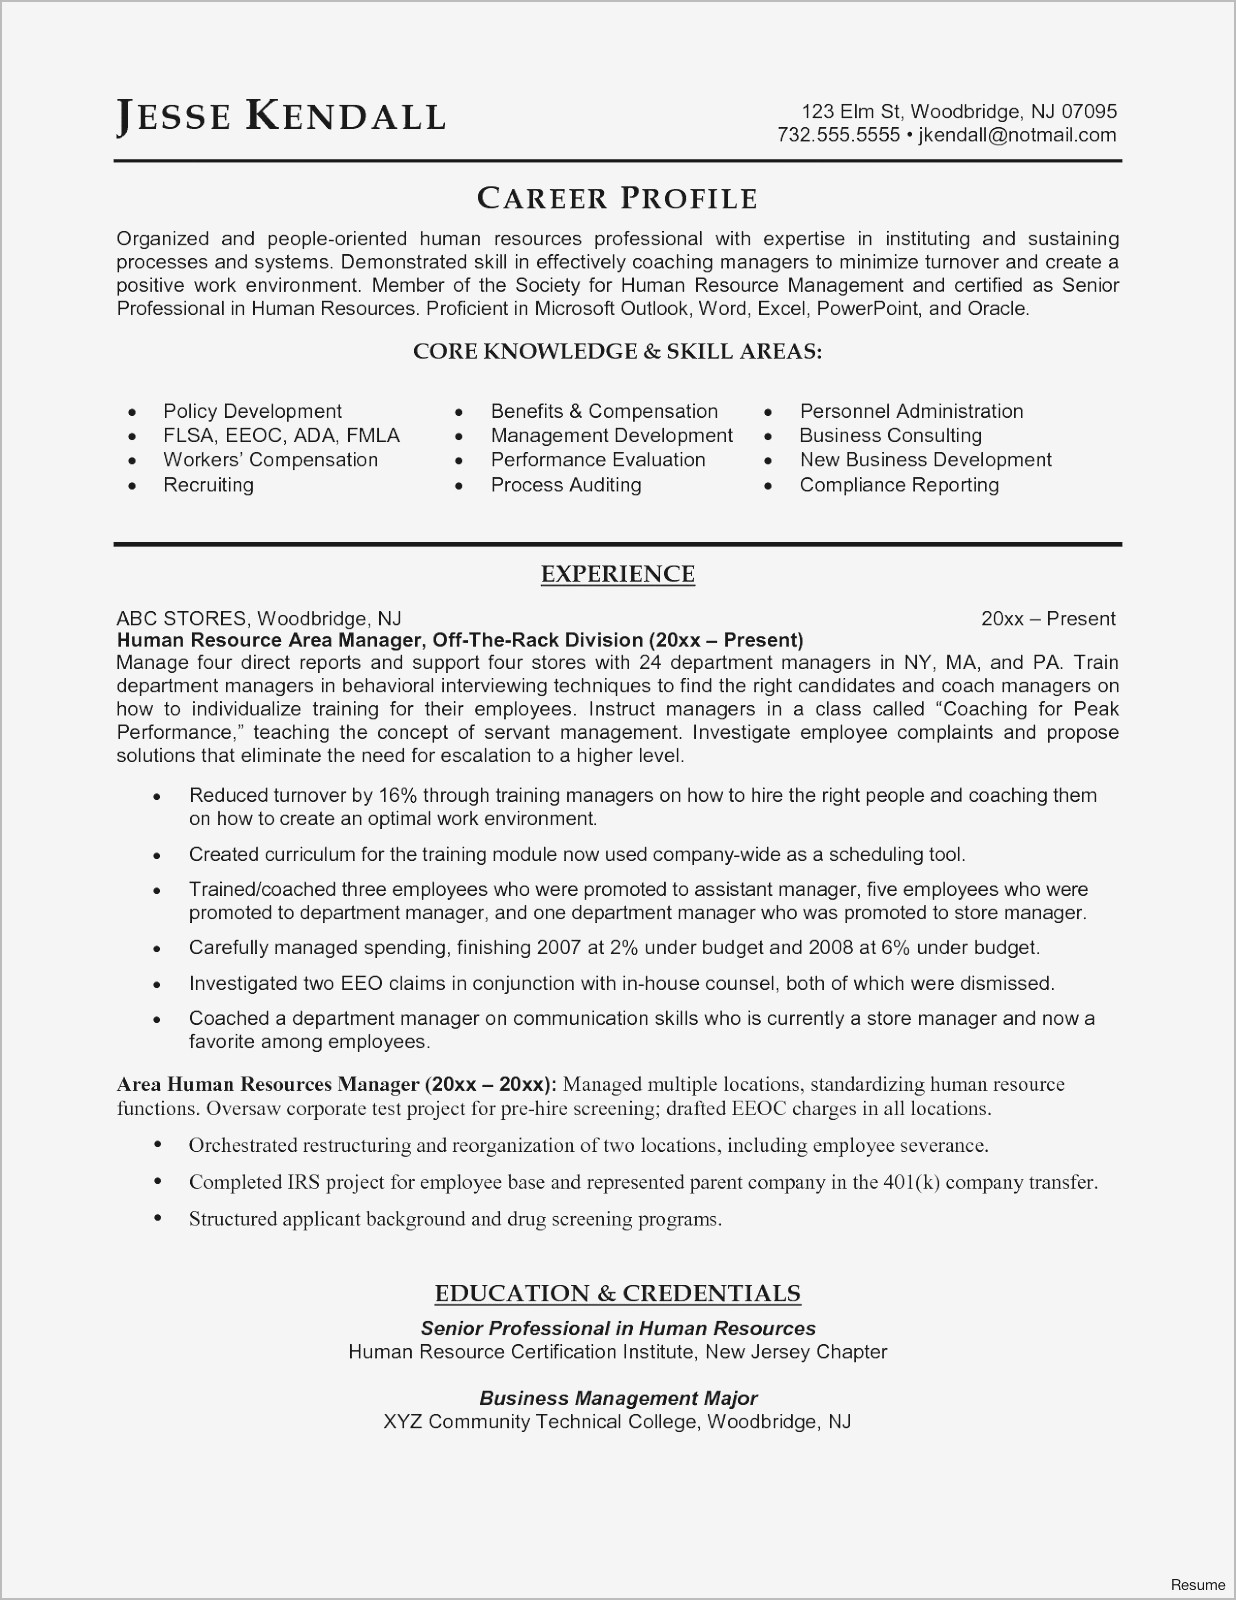 Basic Cover Letter Template Word - Resume Cover Letter Template Word Ideas